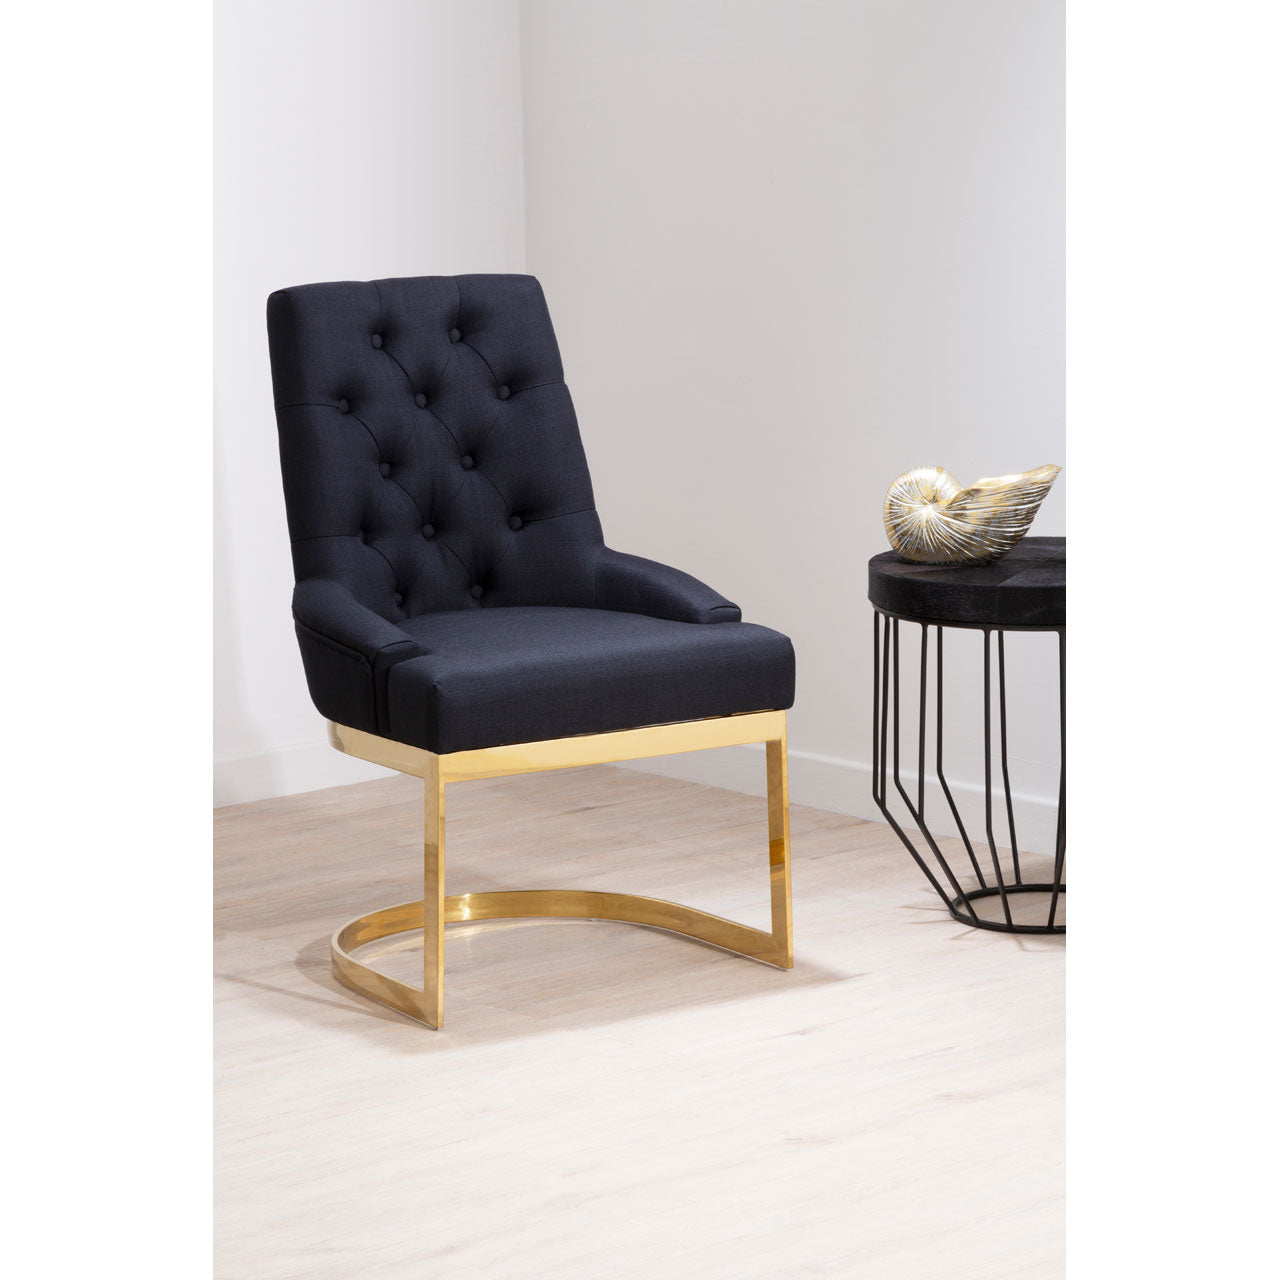  Premier-Olivia's Boutique Hotel Collection - Anna Dining Chair Black Fabric-Black 925 